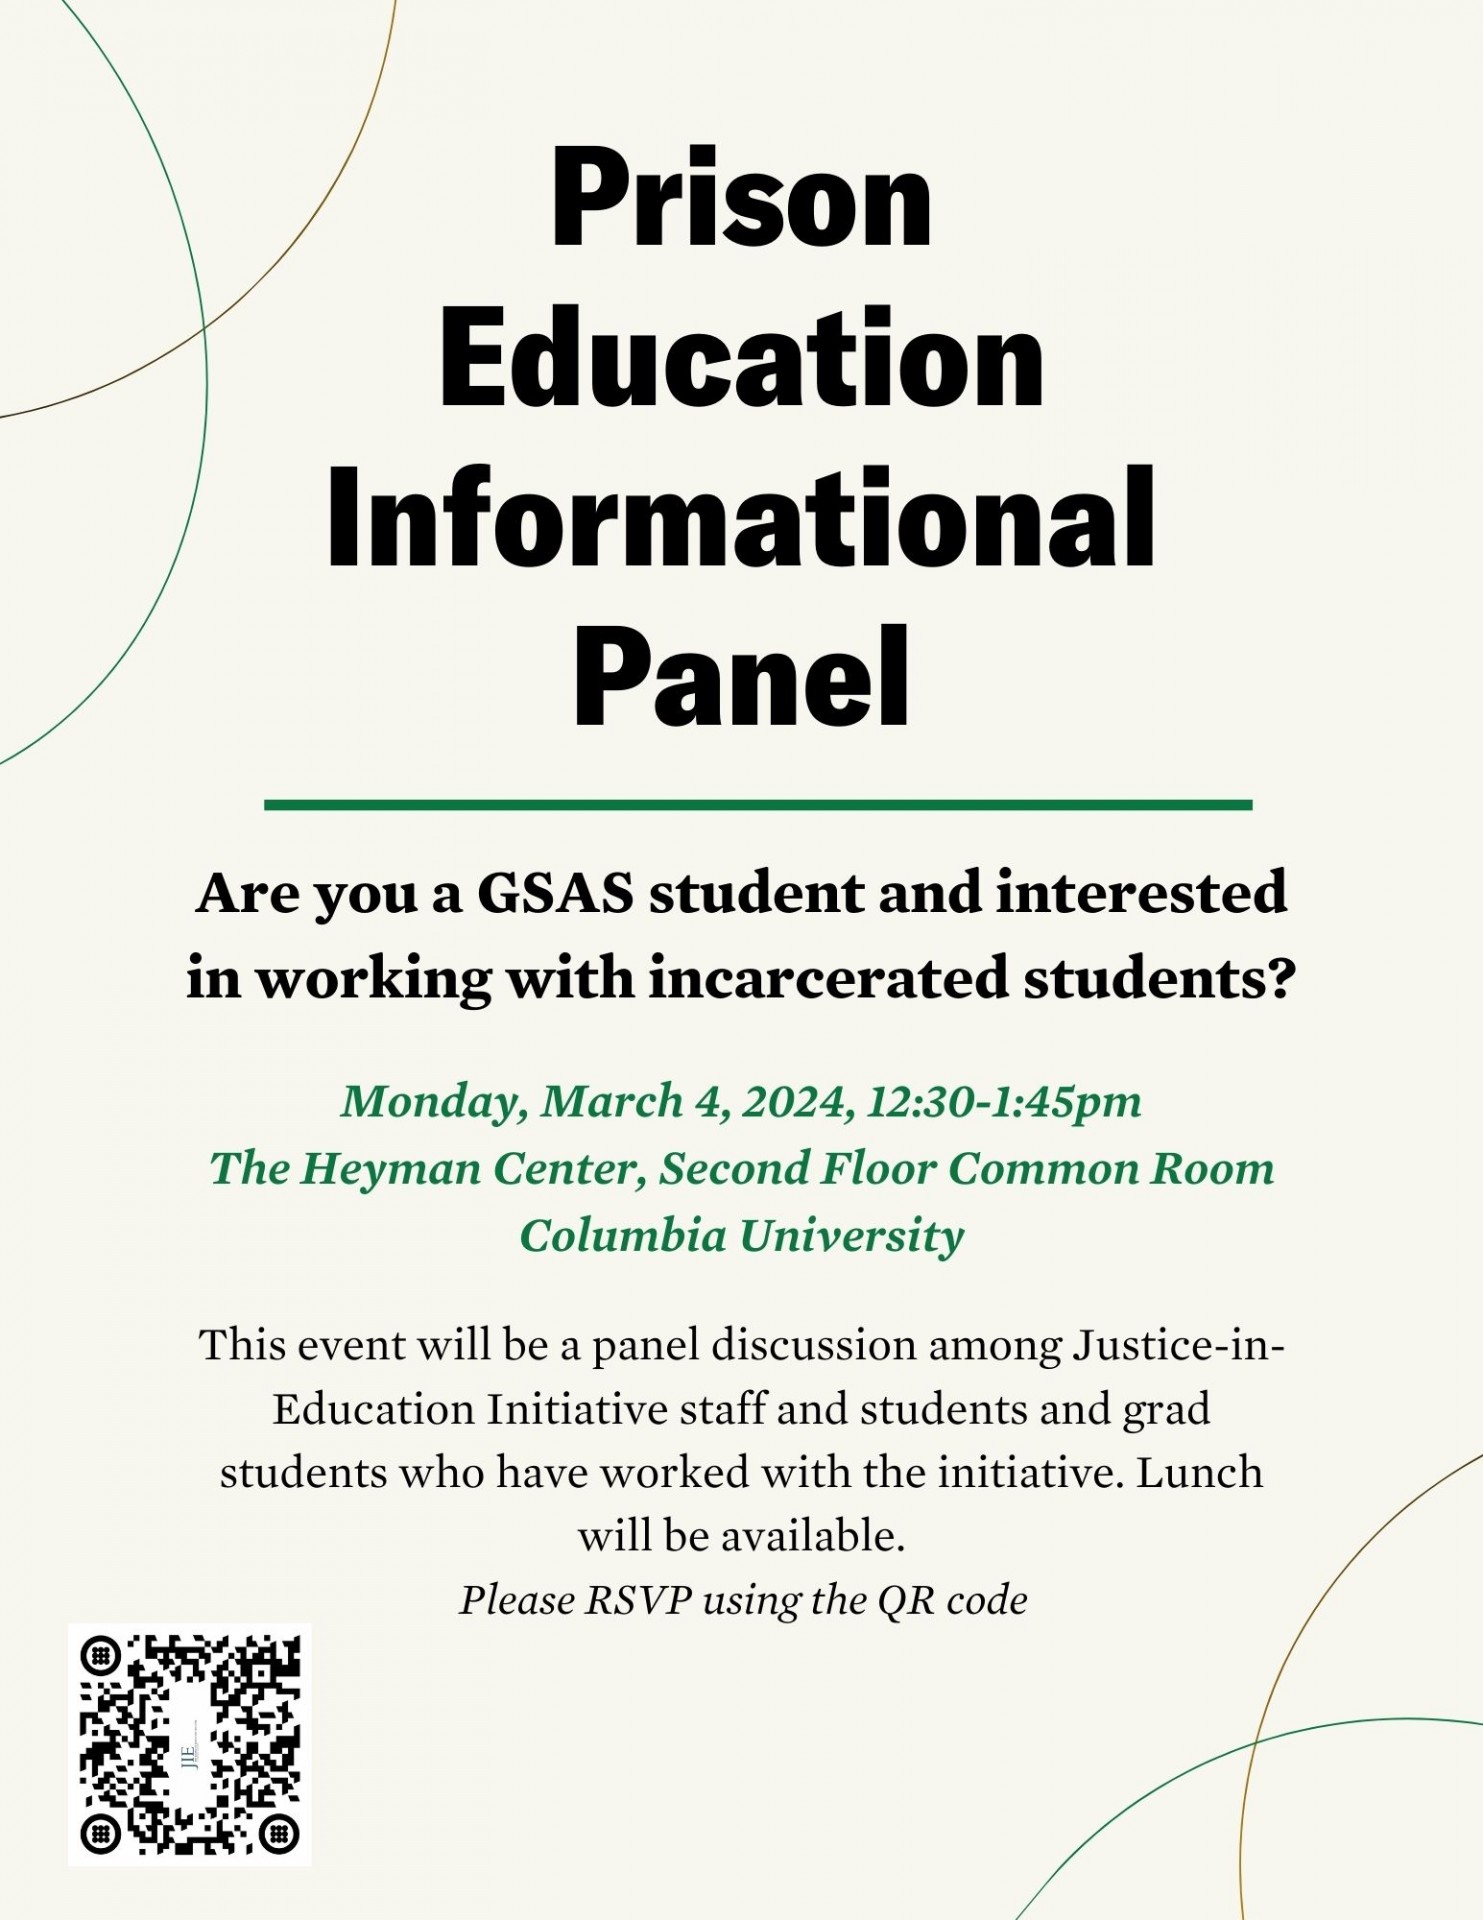 Prison Education Informational Panel: Are you a GSAS student and interested in working with incarcerated students? 